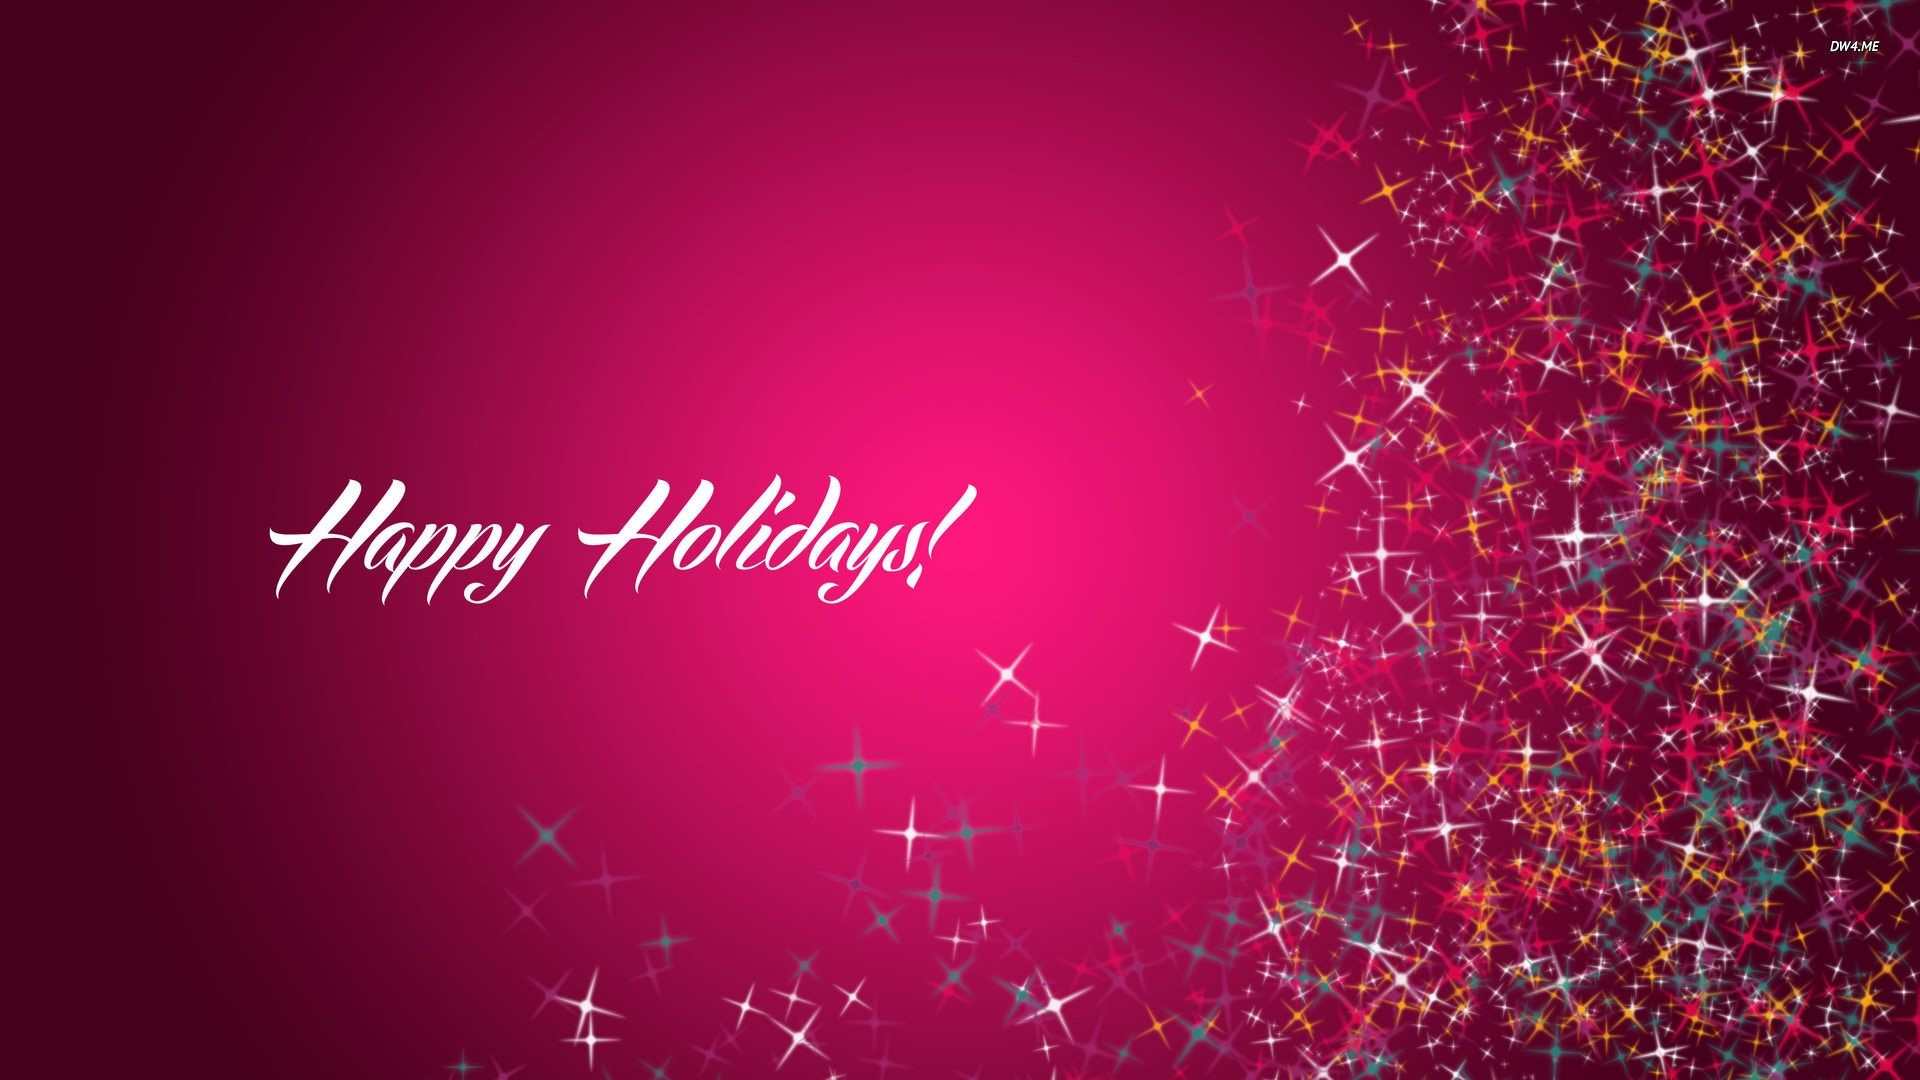 free holiday desktop wallpaper,text,pink,new years day,font,fireworks